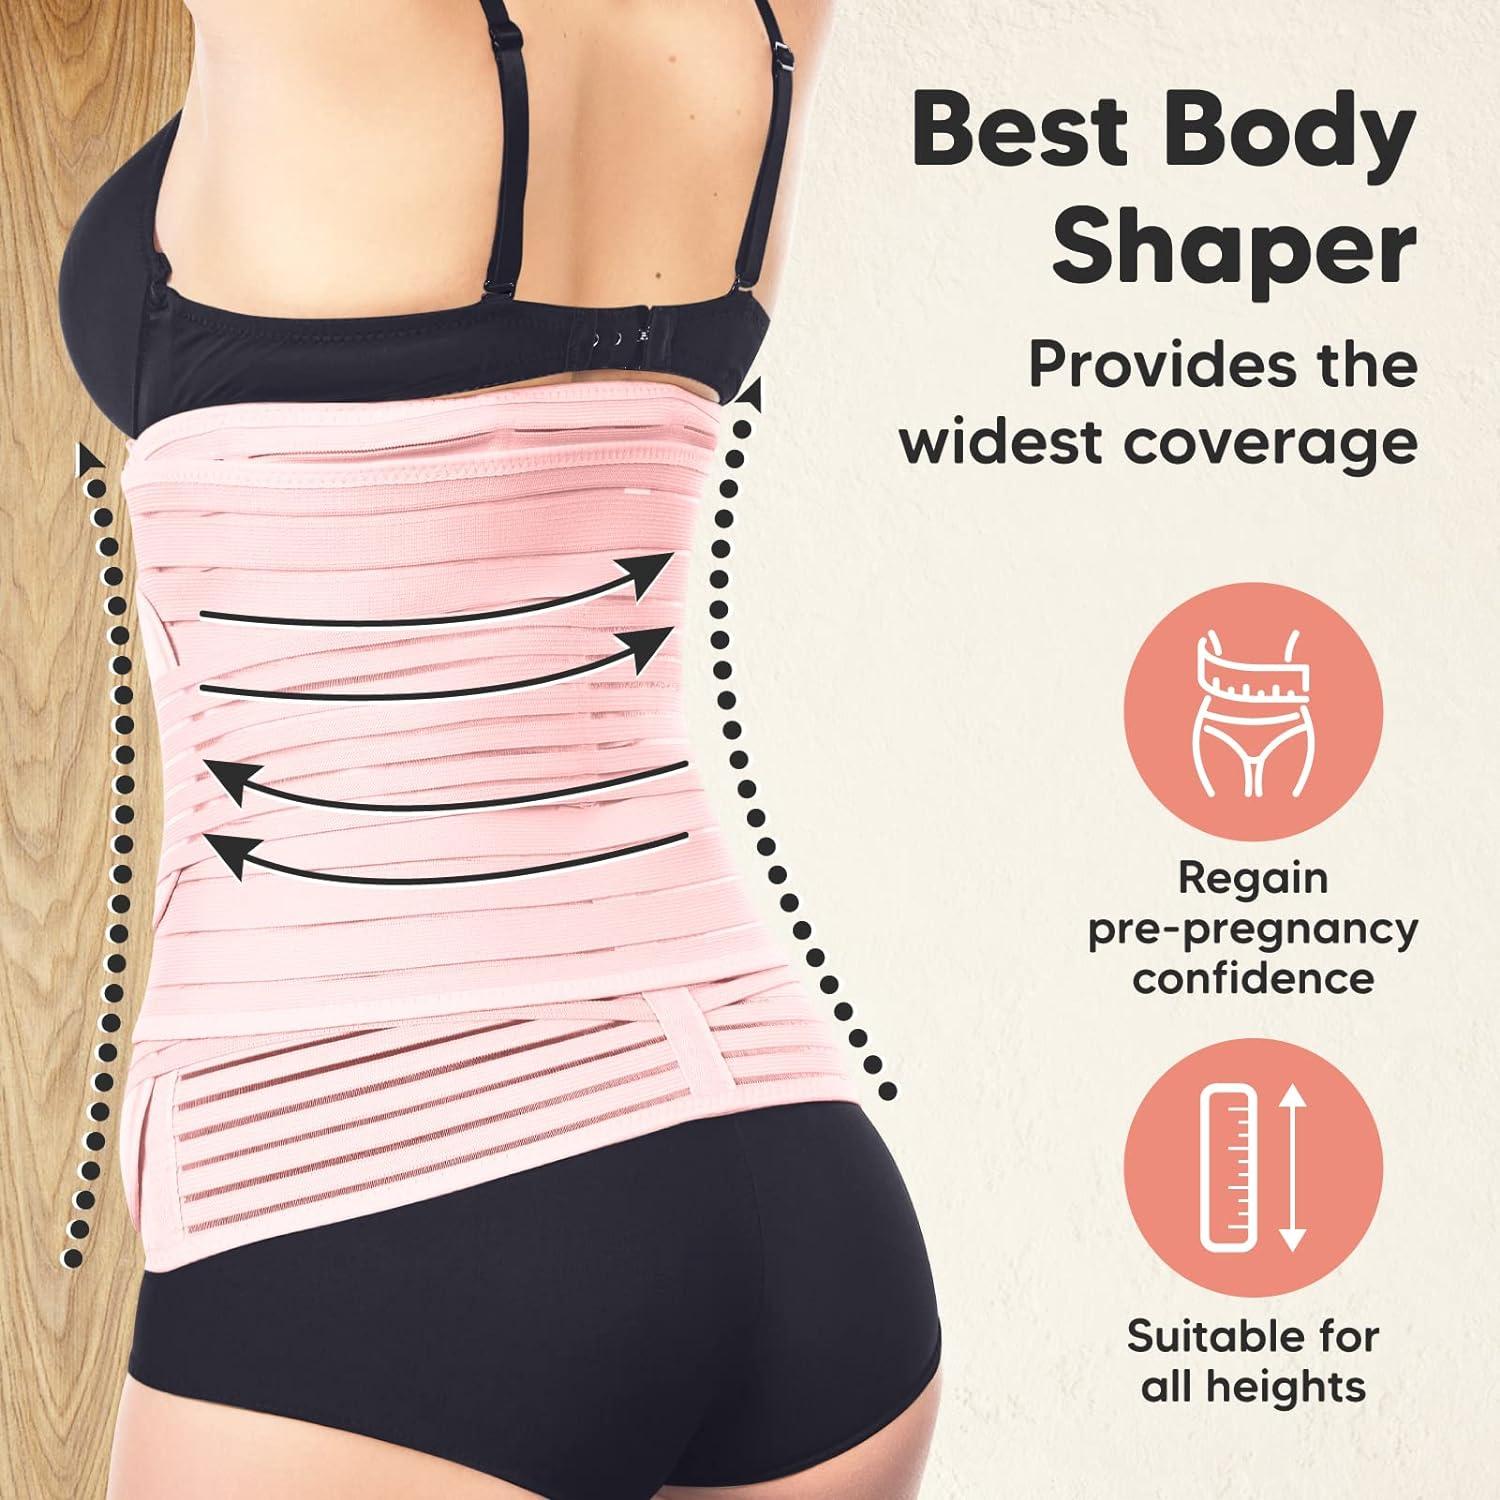 Revive 3 in 1 Postpartum Belly Band Wrap, Post Partum Waist